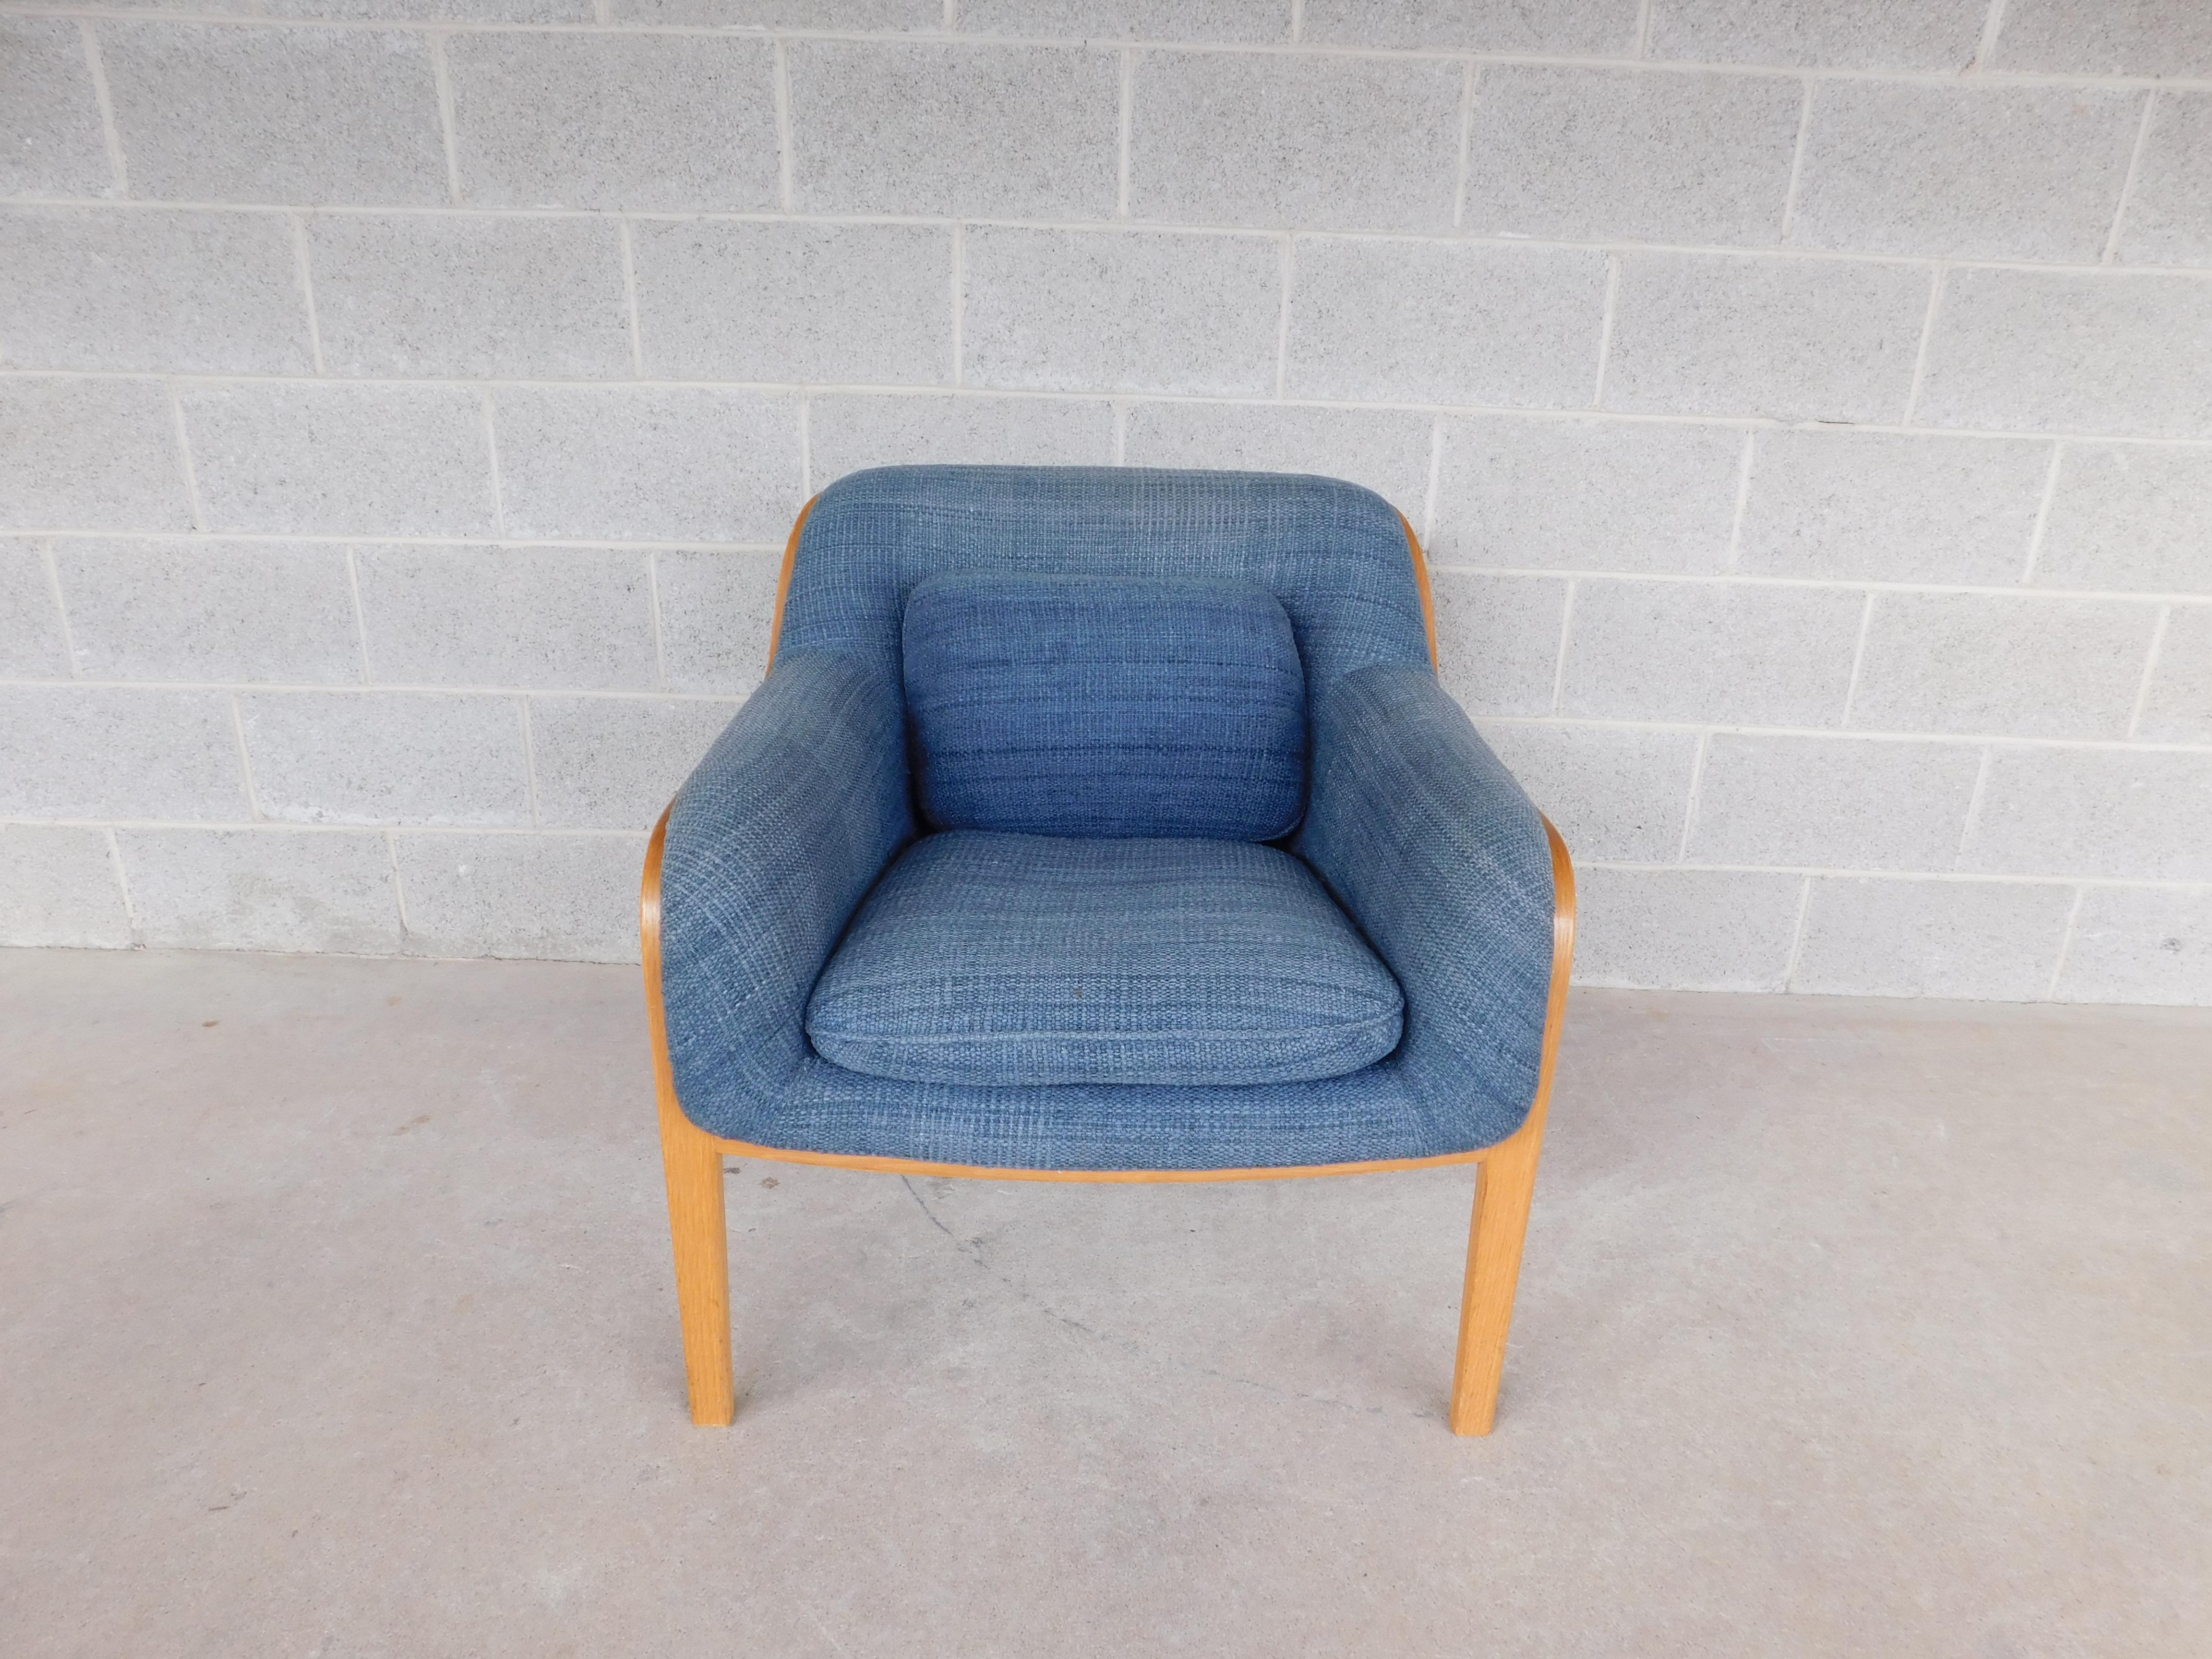 20th Century Midcentury Bentwood Lounge Chair by Bill Stephens for Knoll For Sale